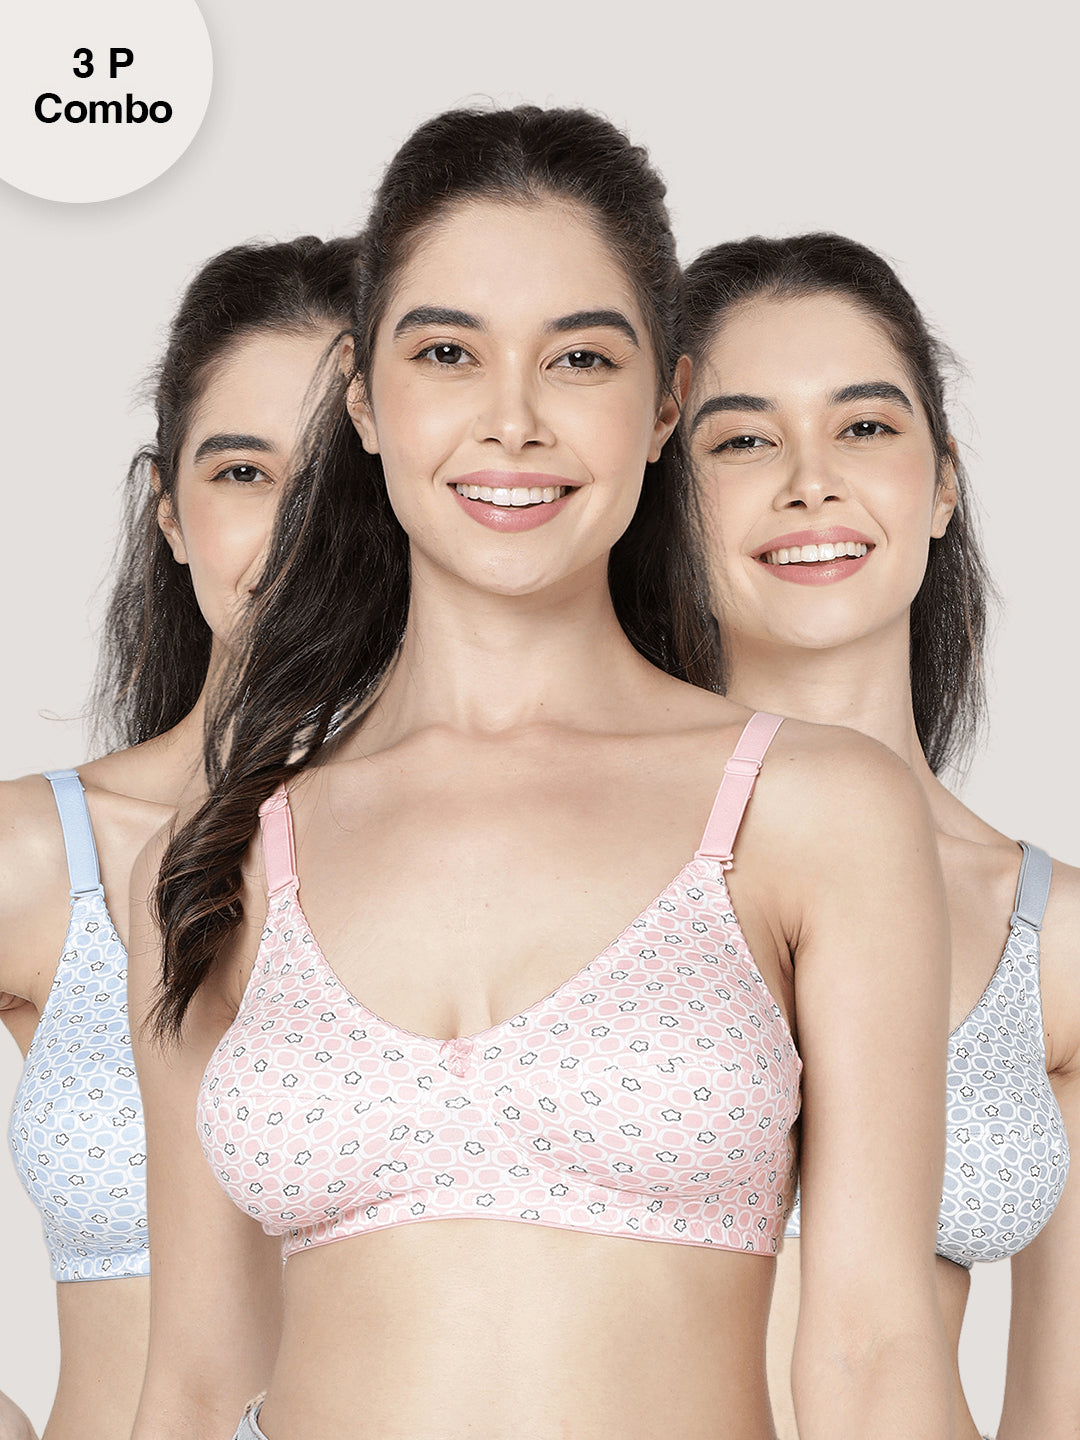 Soft, breathable, supremely comfortable. This Kalyani Cotton printed bras  are EVERYTHING you need it for summers. Available in 3 colors COMFORT WITHIN  To